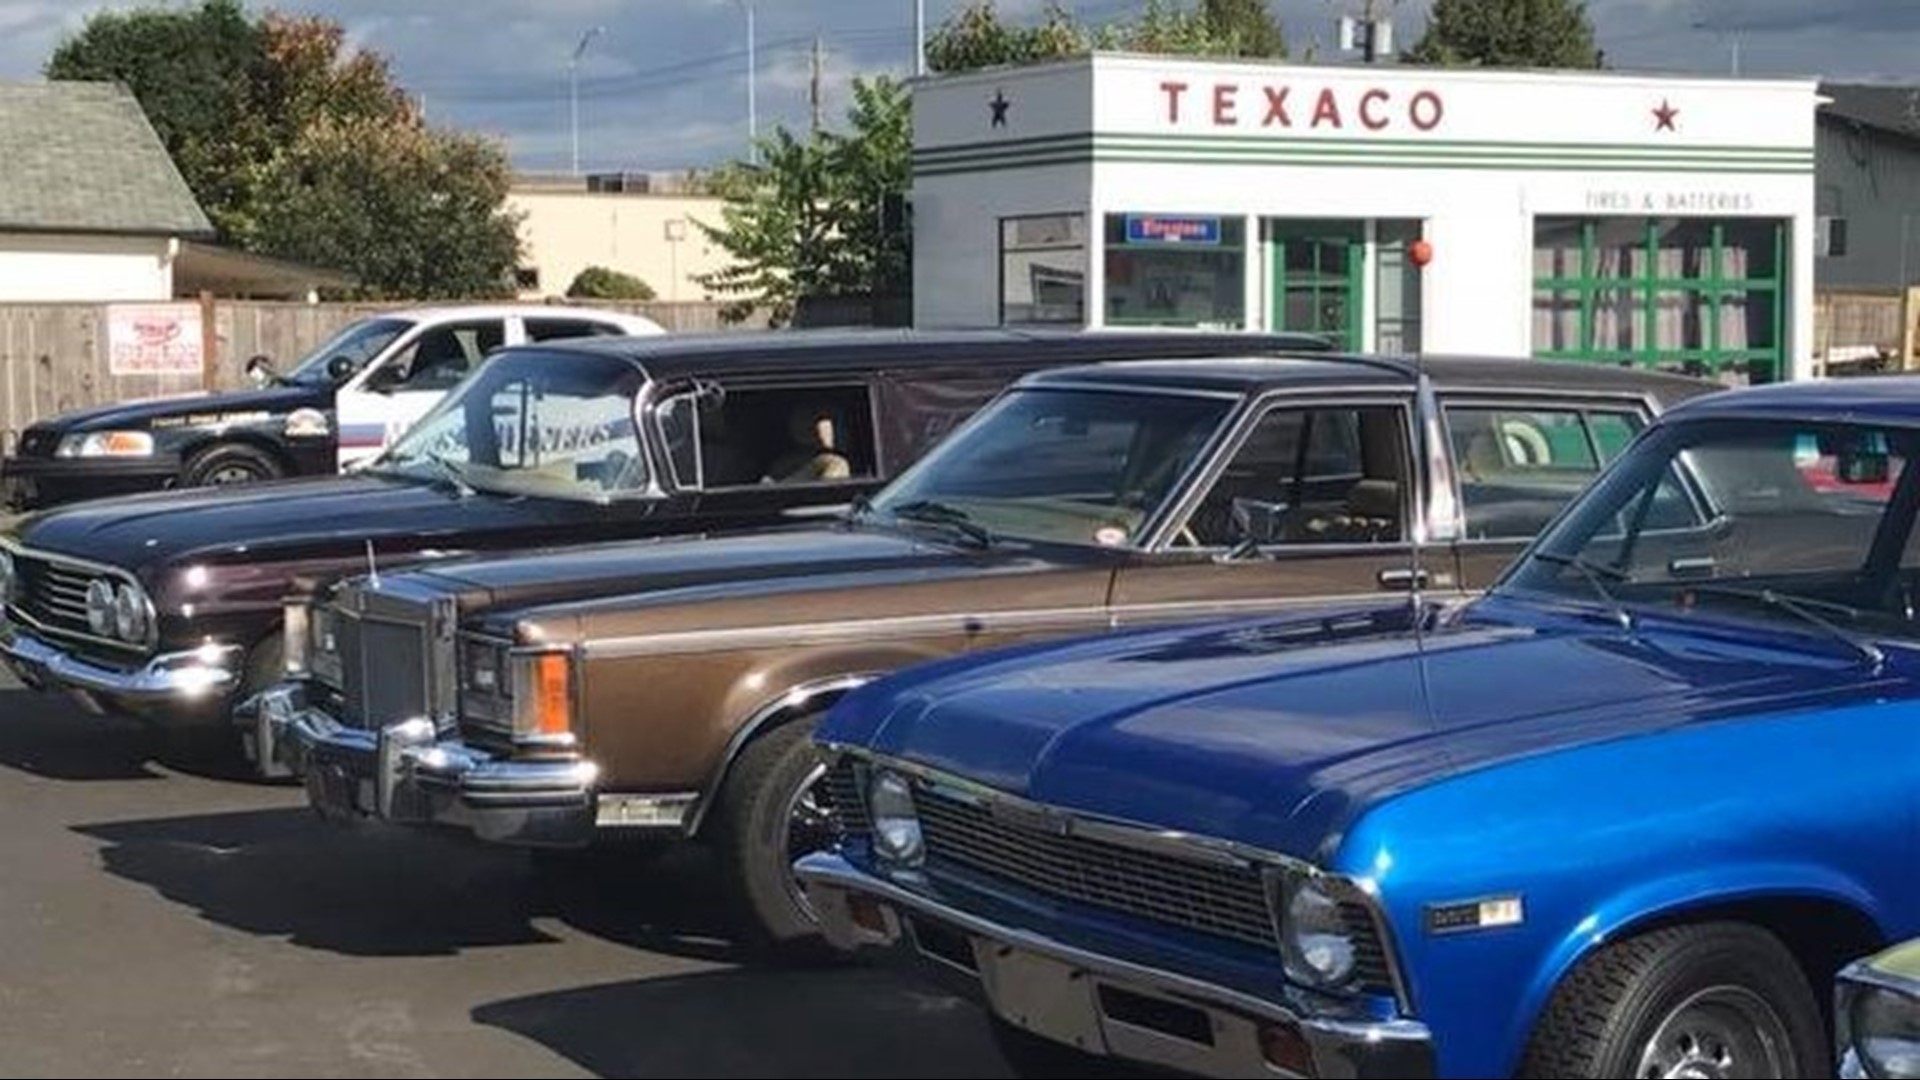 Mrs. Turner's Hometown Cafe serves massive hot dogs and hosts car shows every Friday in the summer- no wonder it's a neighborhood favorite.